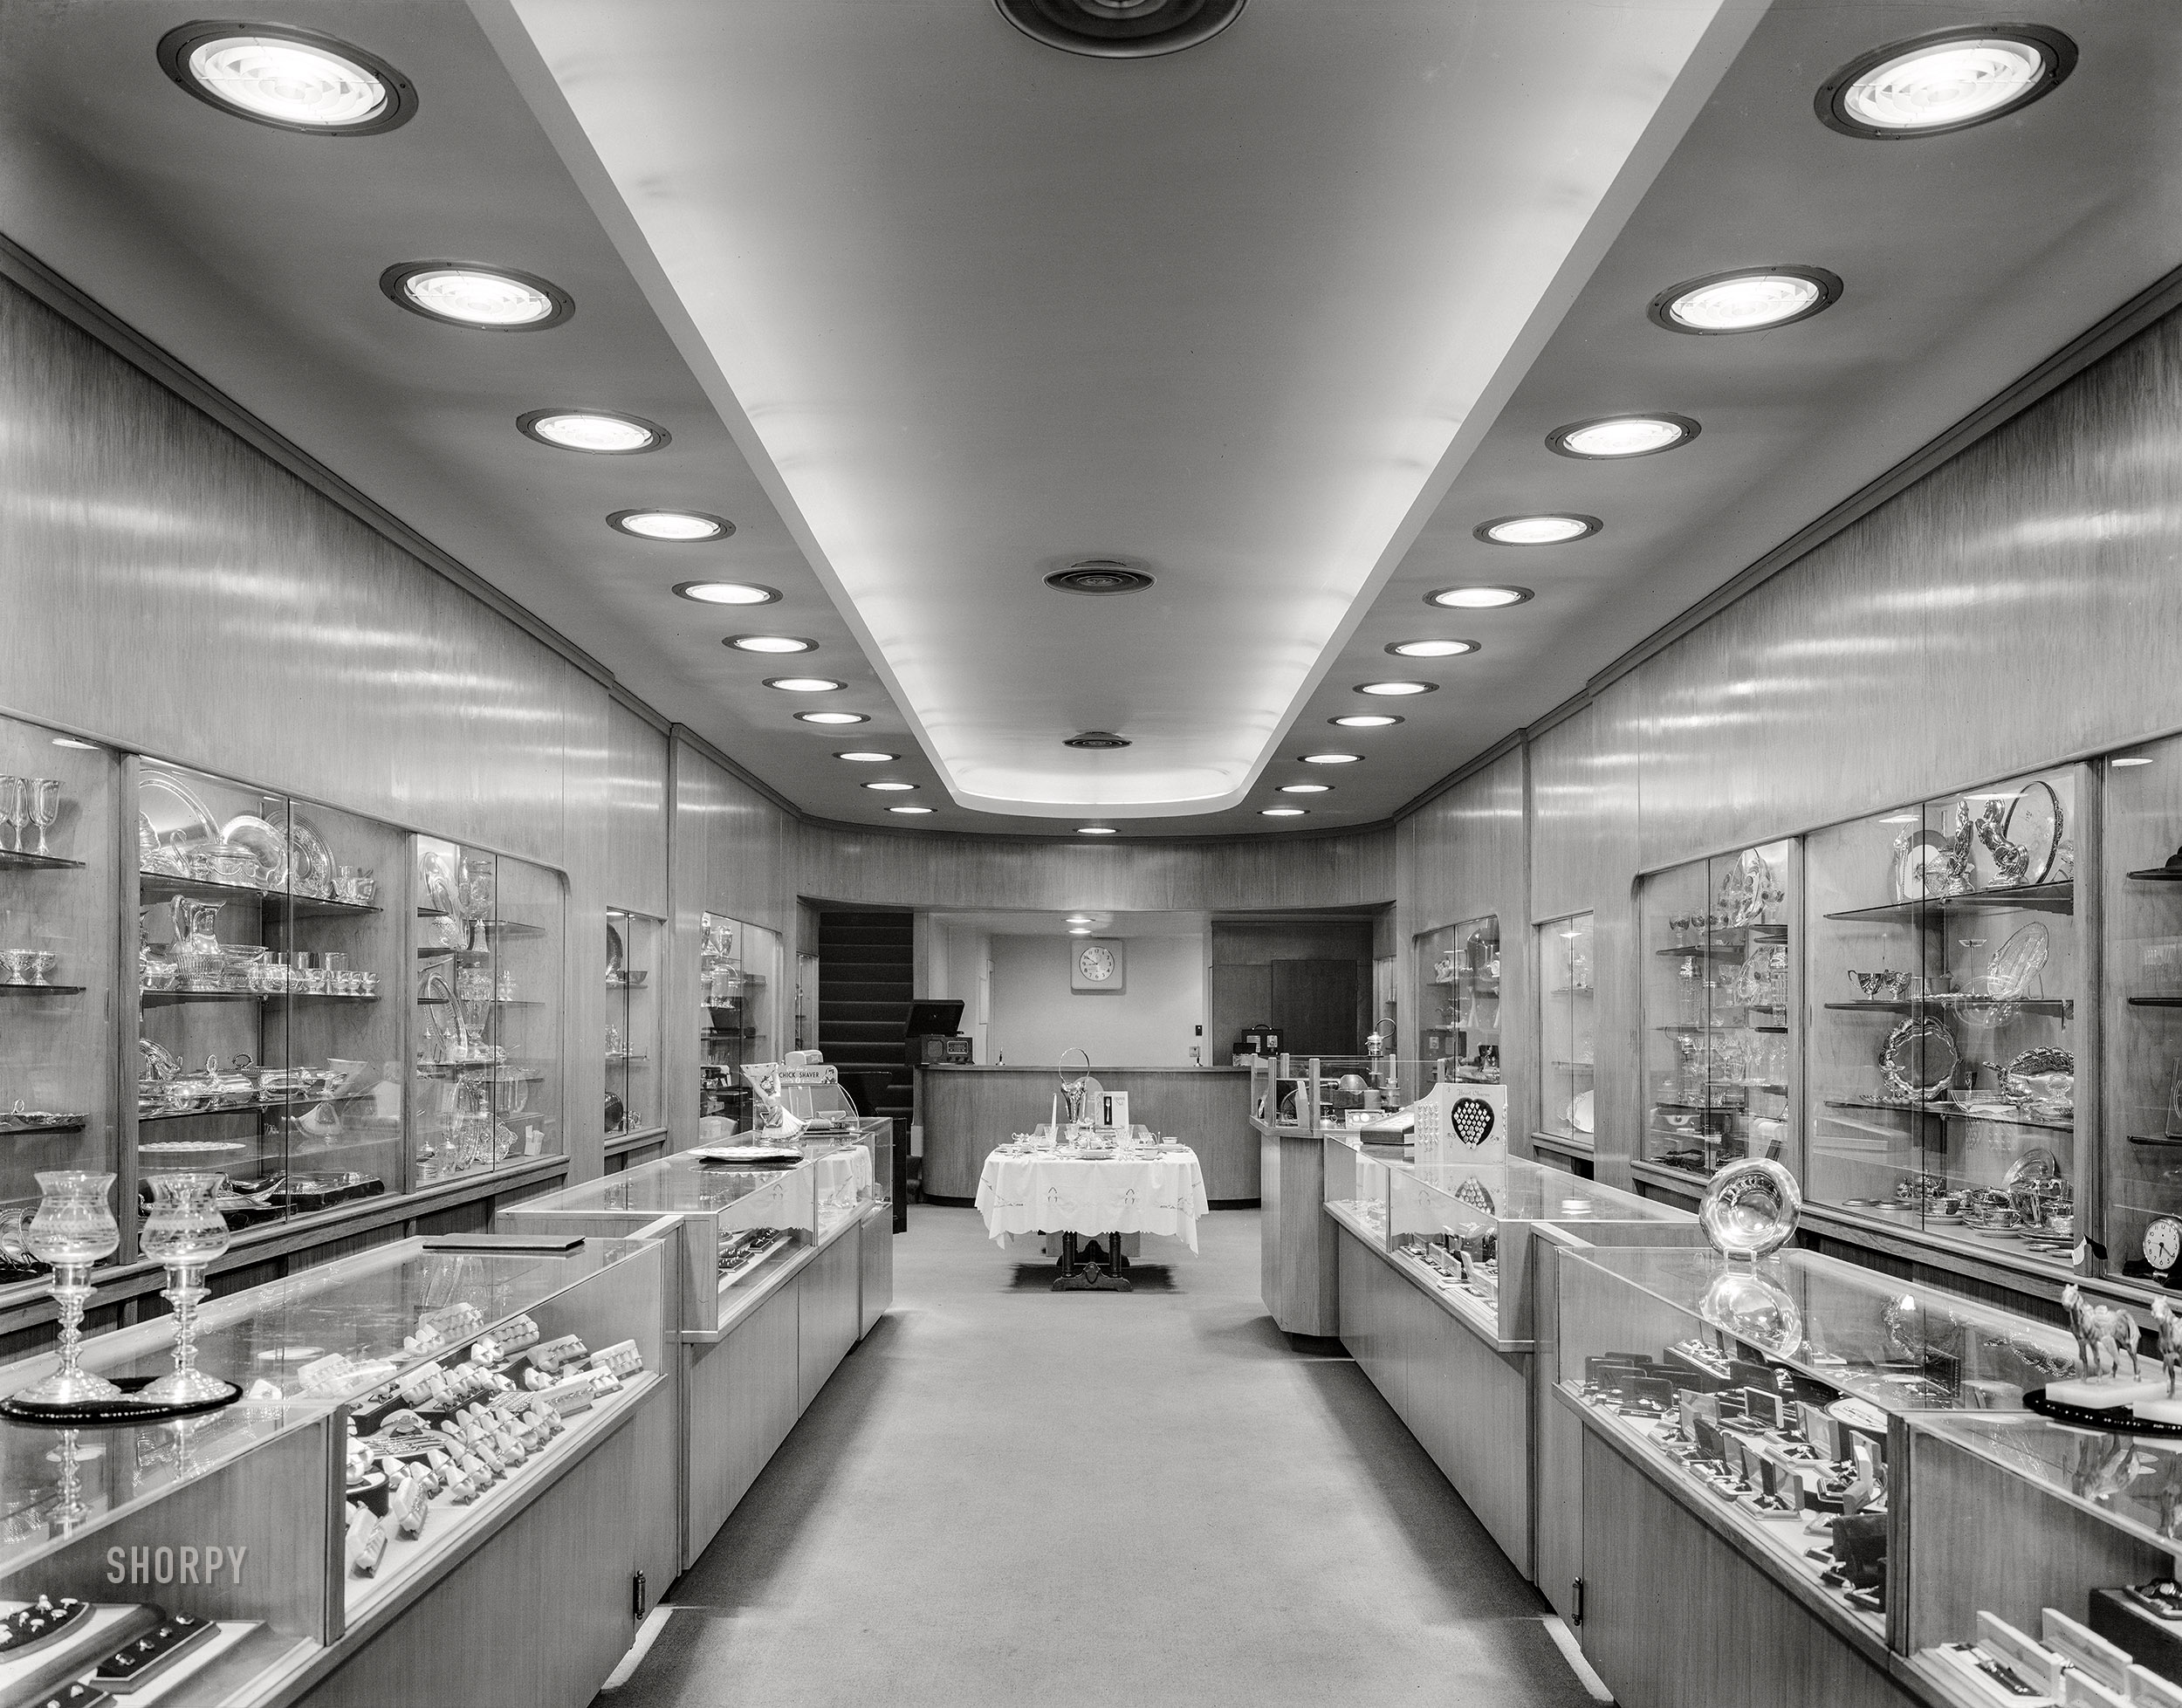 Washington, D.C., circa 1940. "Potomac Electric Power Co. -- Air Conditioning and Lighting -- Chas. Schwartz & Son, jewelers." 8x10 acetate negative by Theodor Horydczak. View full size.